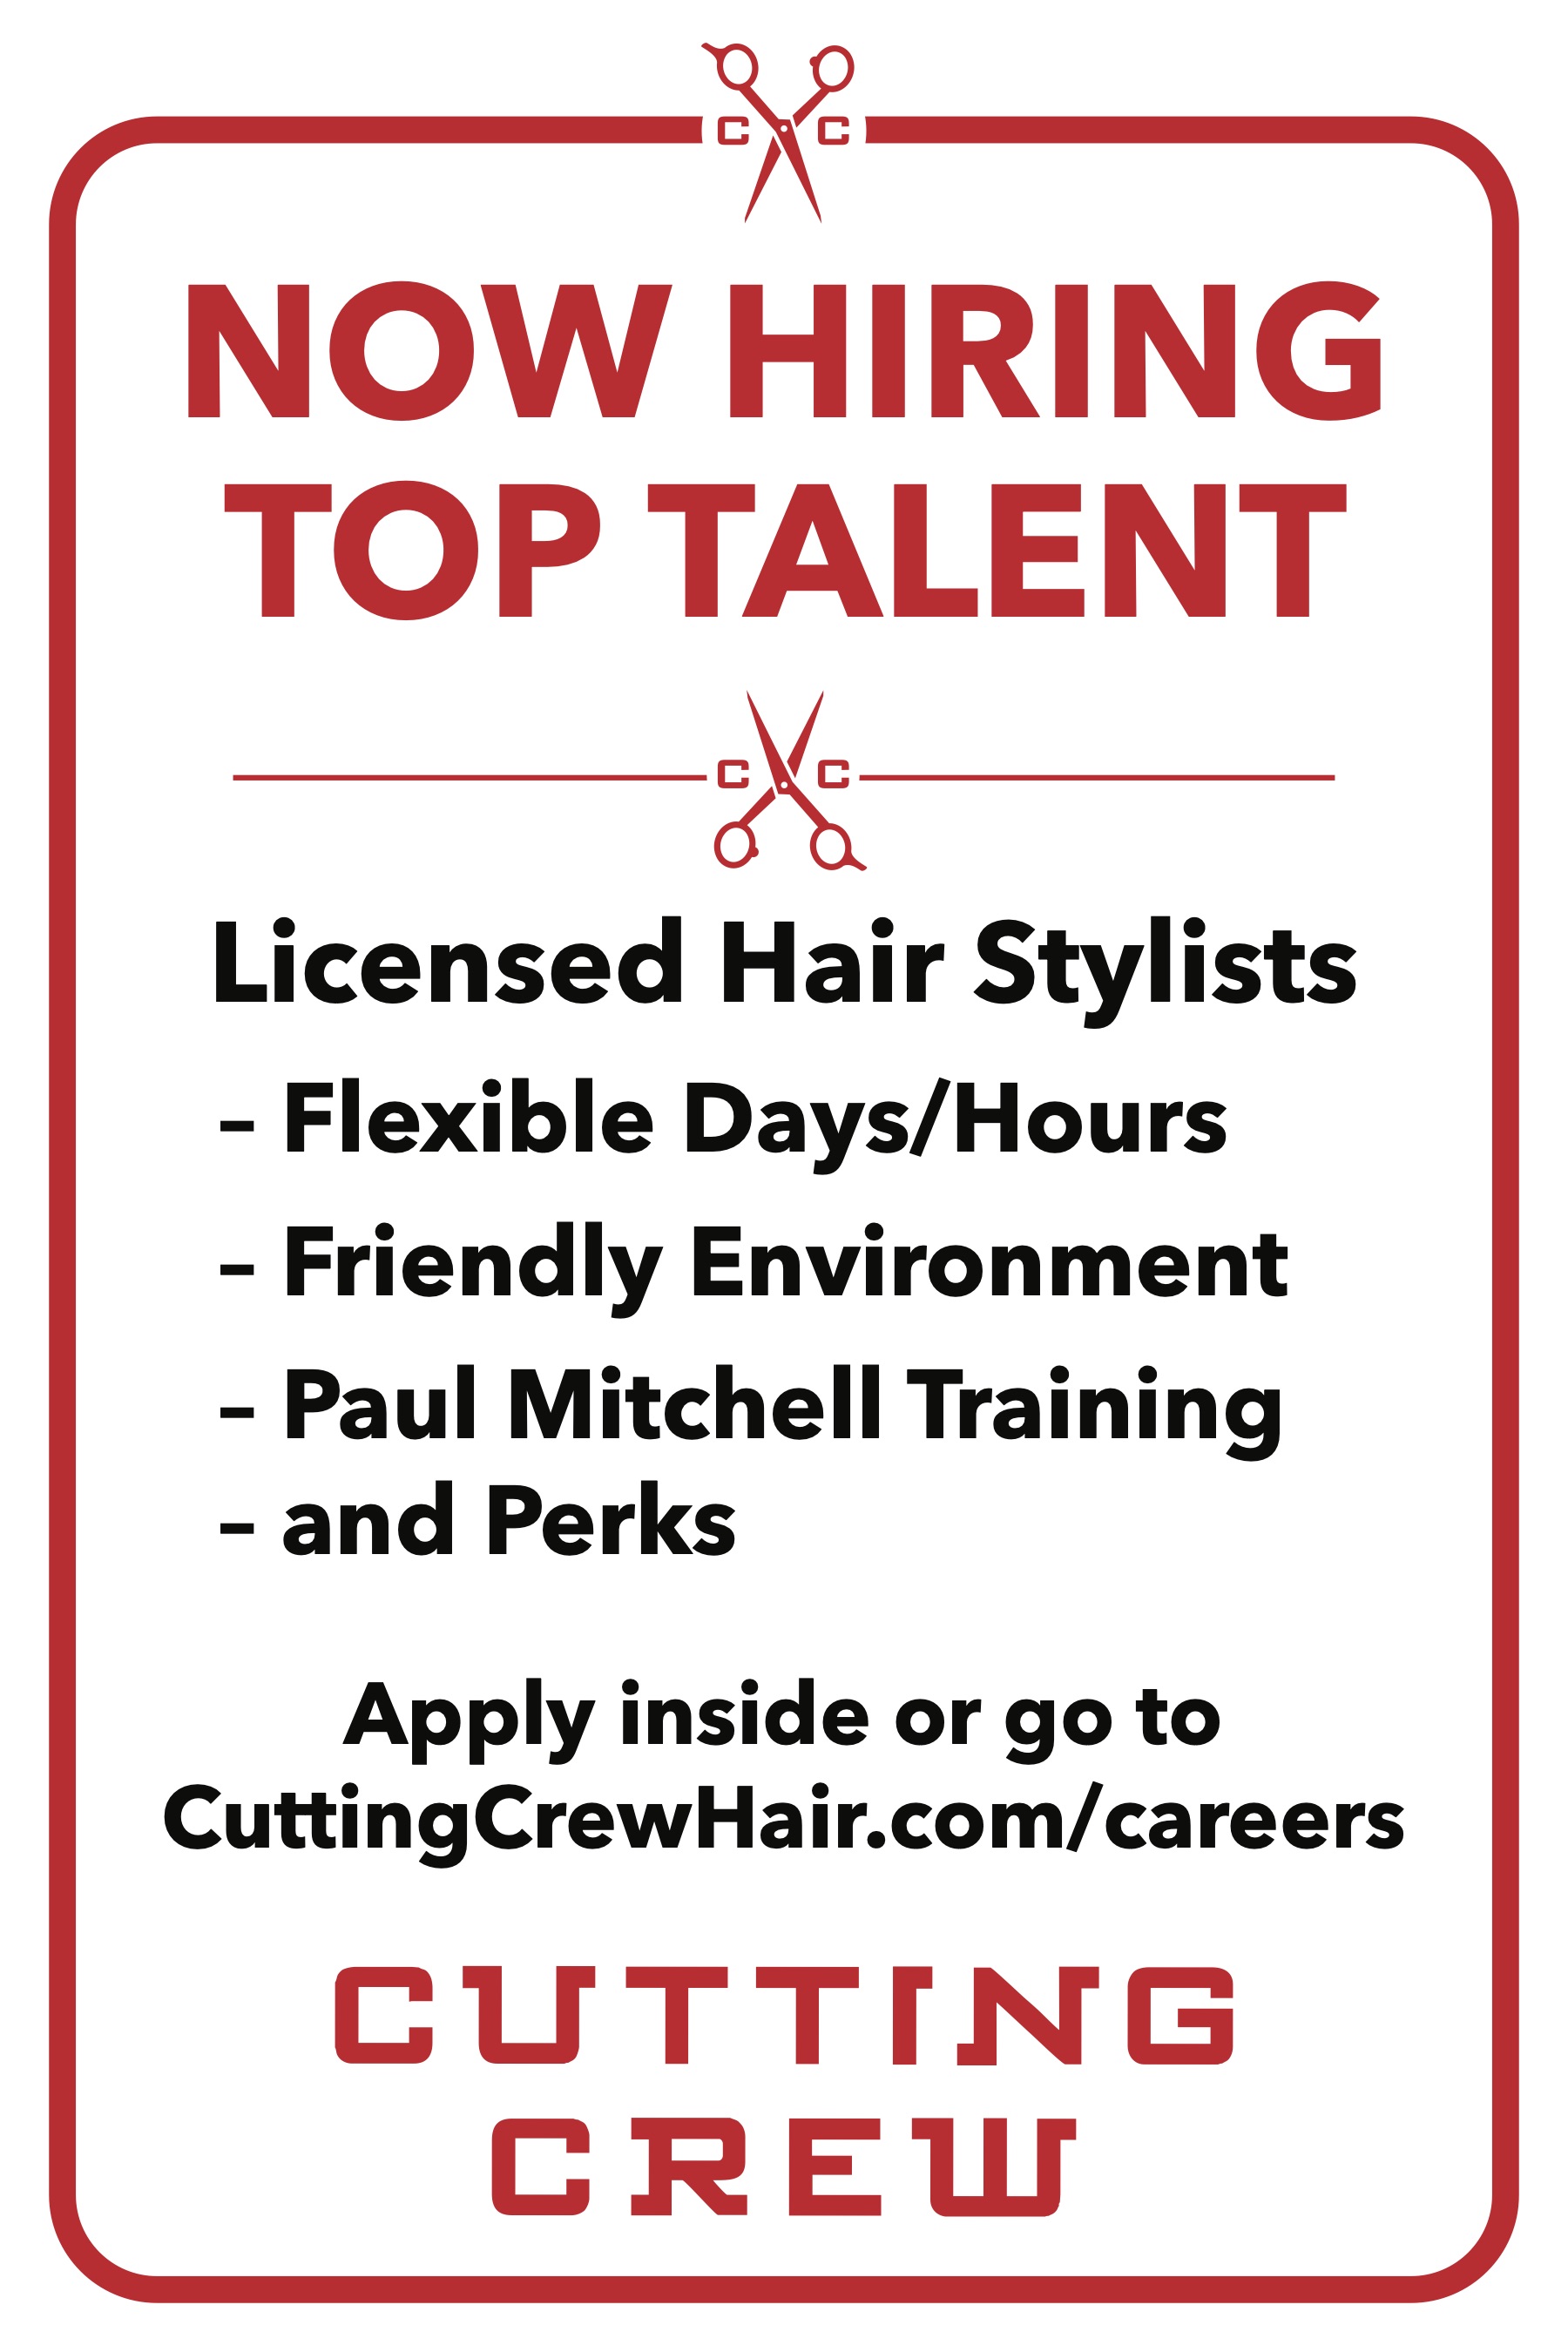 Jump start your career today with the Cutting Crew Hair Salon team and our current employment opportunities in Palatine Bridge.